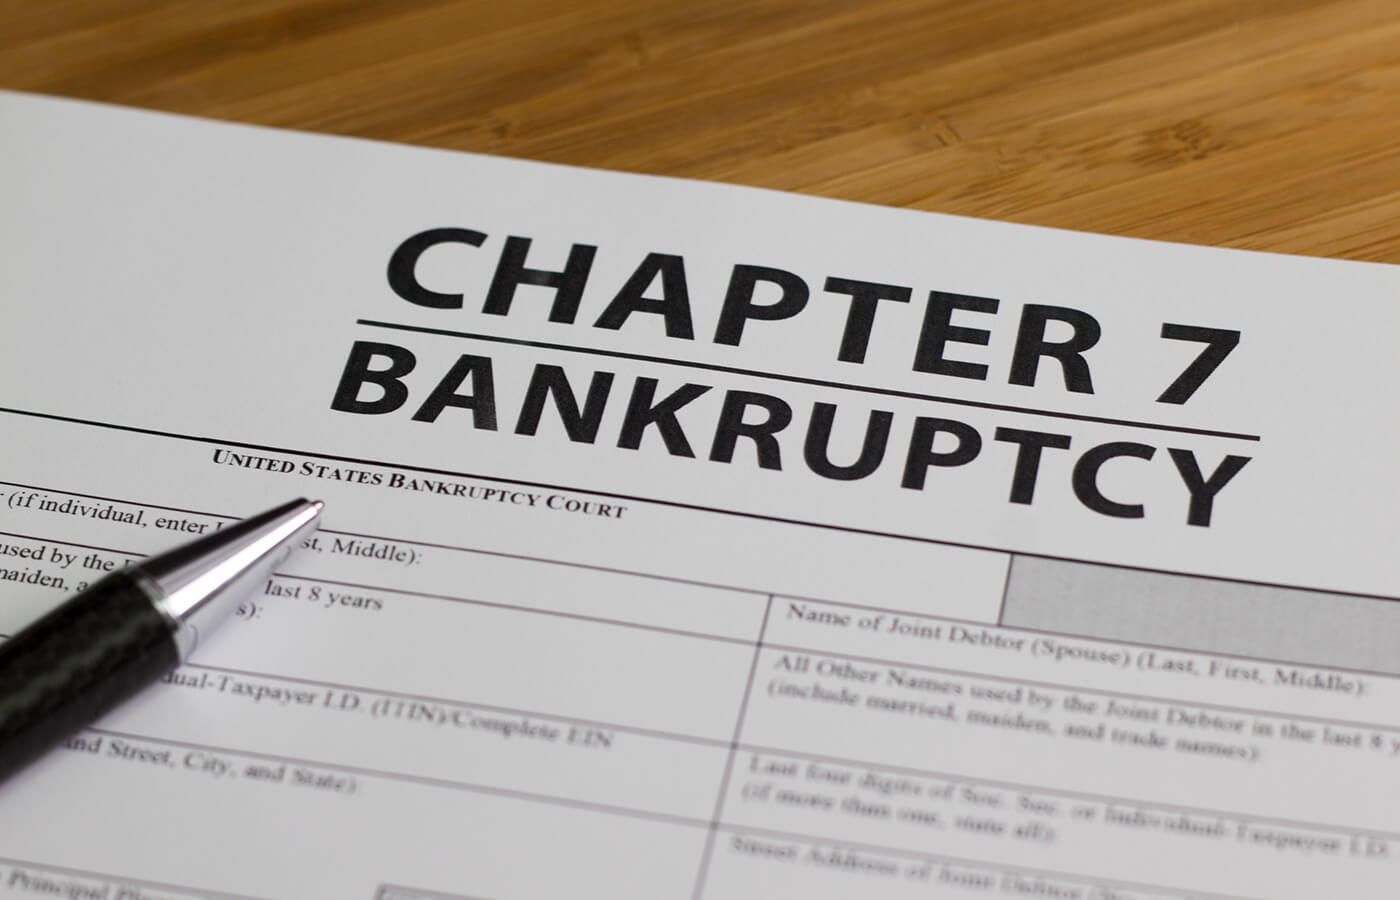 https://s28126.pcdn.co/blogs/ask-experian/wp-content/uploads/What-Is-Chapter-7-Bankruptcy_.jpg.optimal.jpg